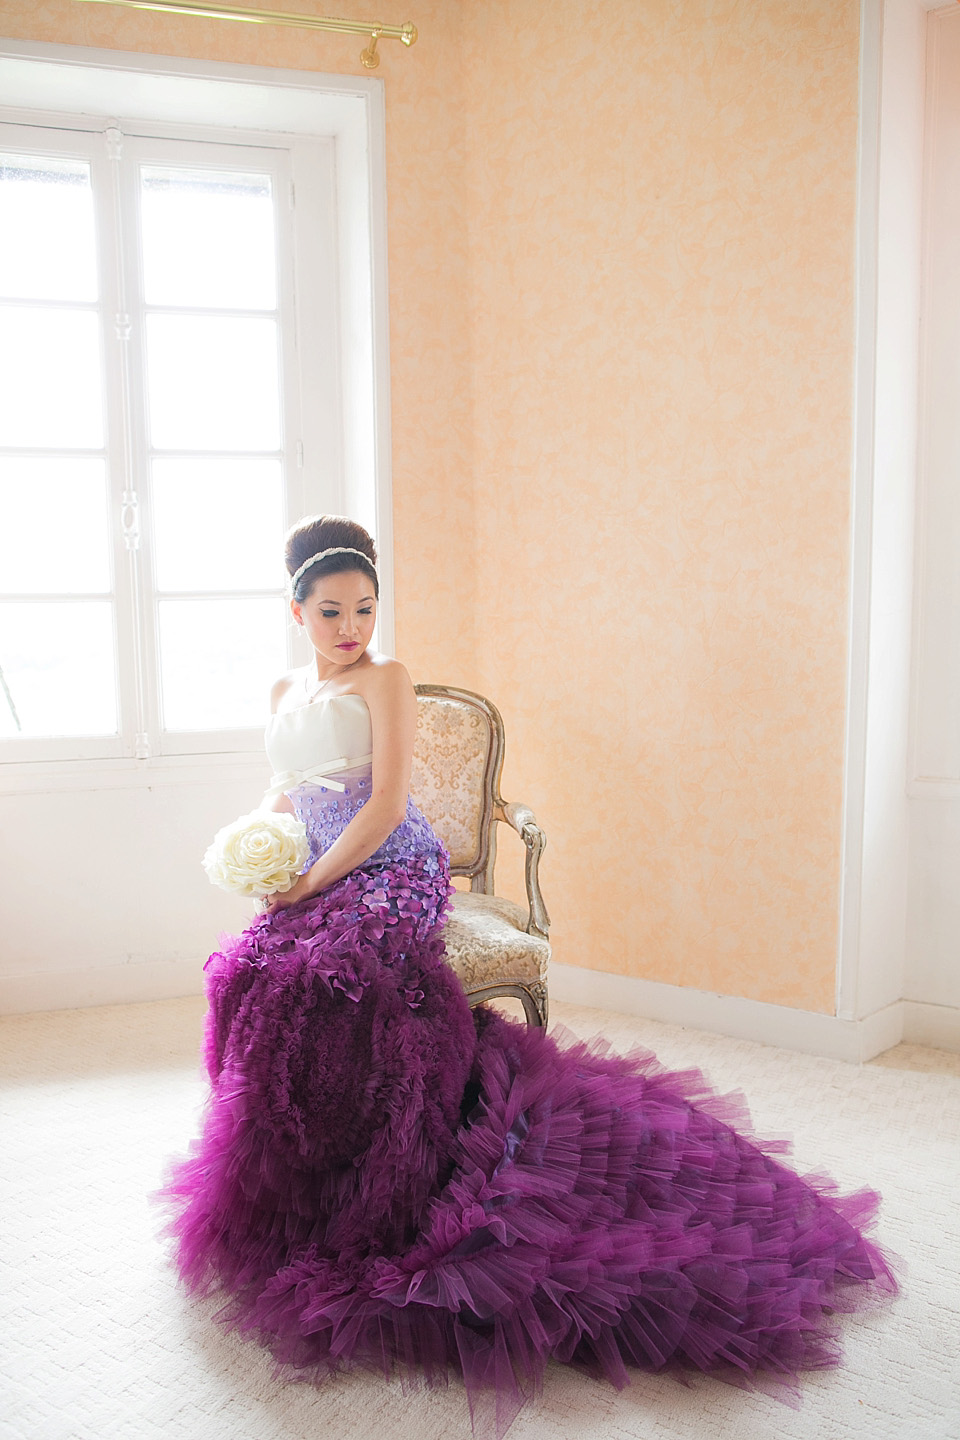 A Purple Ombre and Floral Wedding Dress | Love My Dress ...